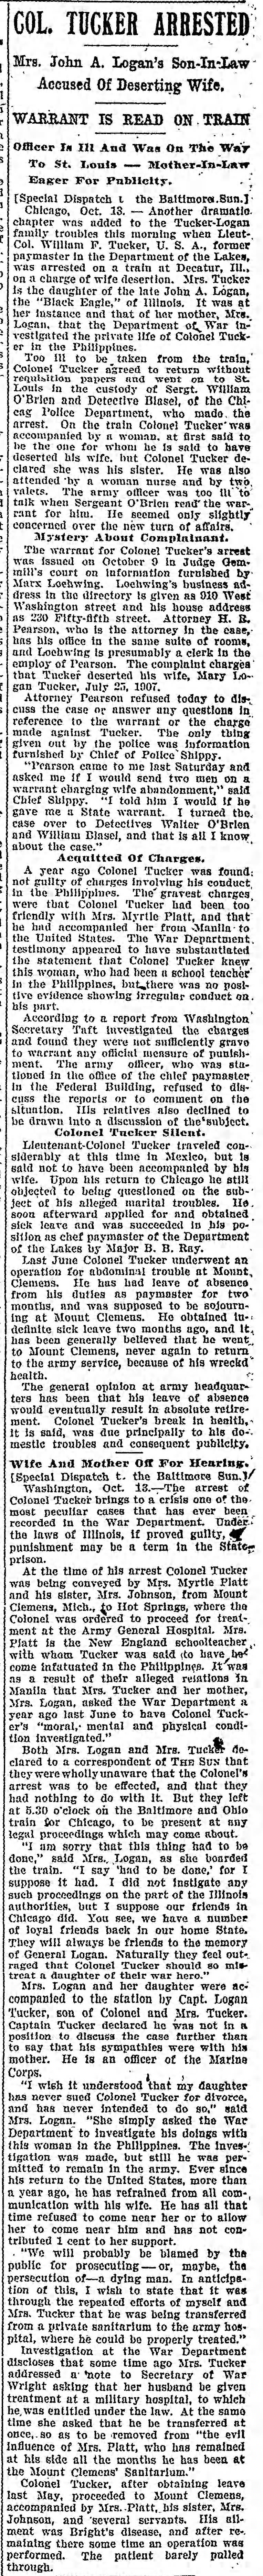 Col Tucker Arrested. The Baltimore Sun (Baltimore, Maryland) October 14, 1908, p 5